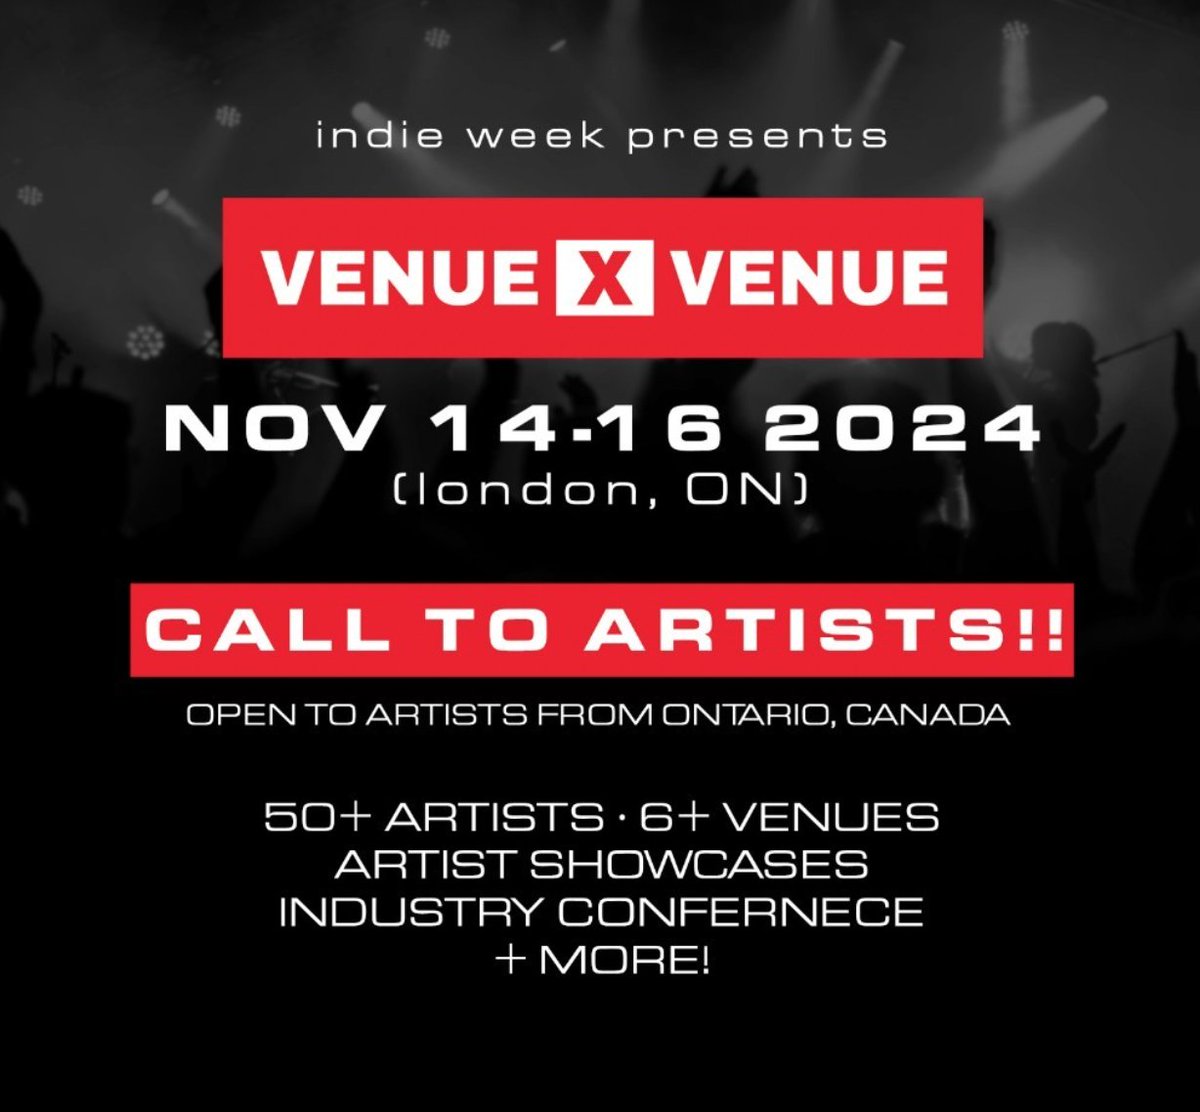 DEADLINE EXTENDED - APPLY TODAY! The application deadline for VENUExVENUE in London, Ontario, has been extended by 3 WEEKS (new deadline: TUES MAY 28) APPLY NOW LINK IN BIO venuexvenue.com #MusicInLondon #Ontario #band #perform #opportunity